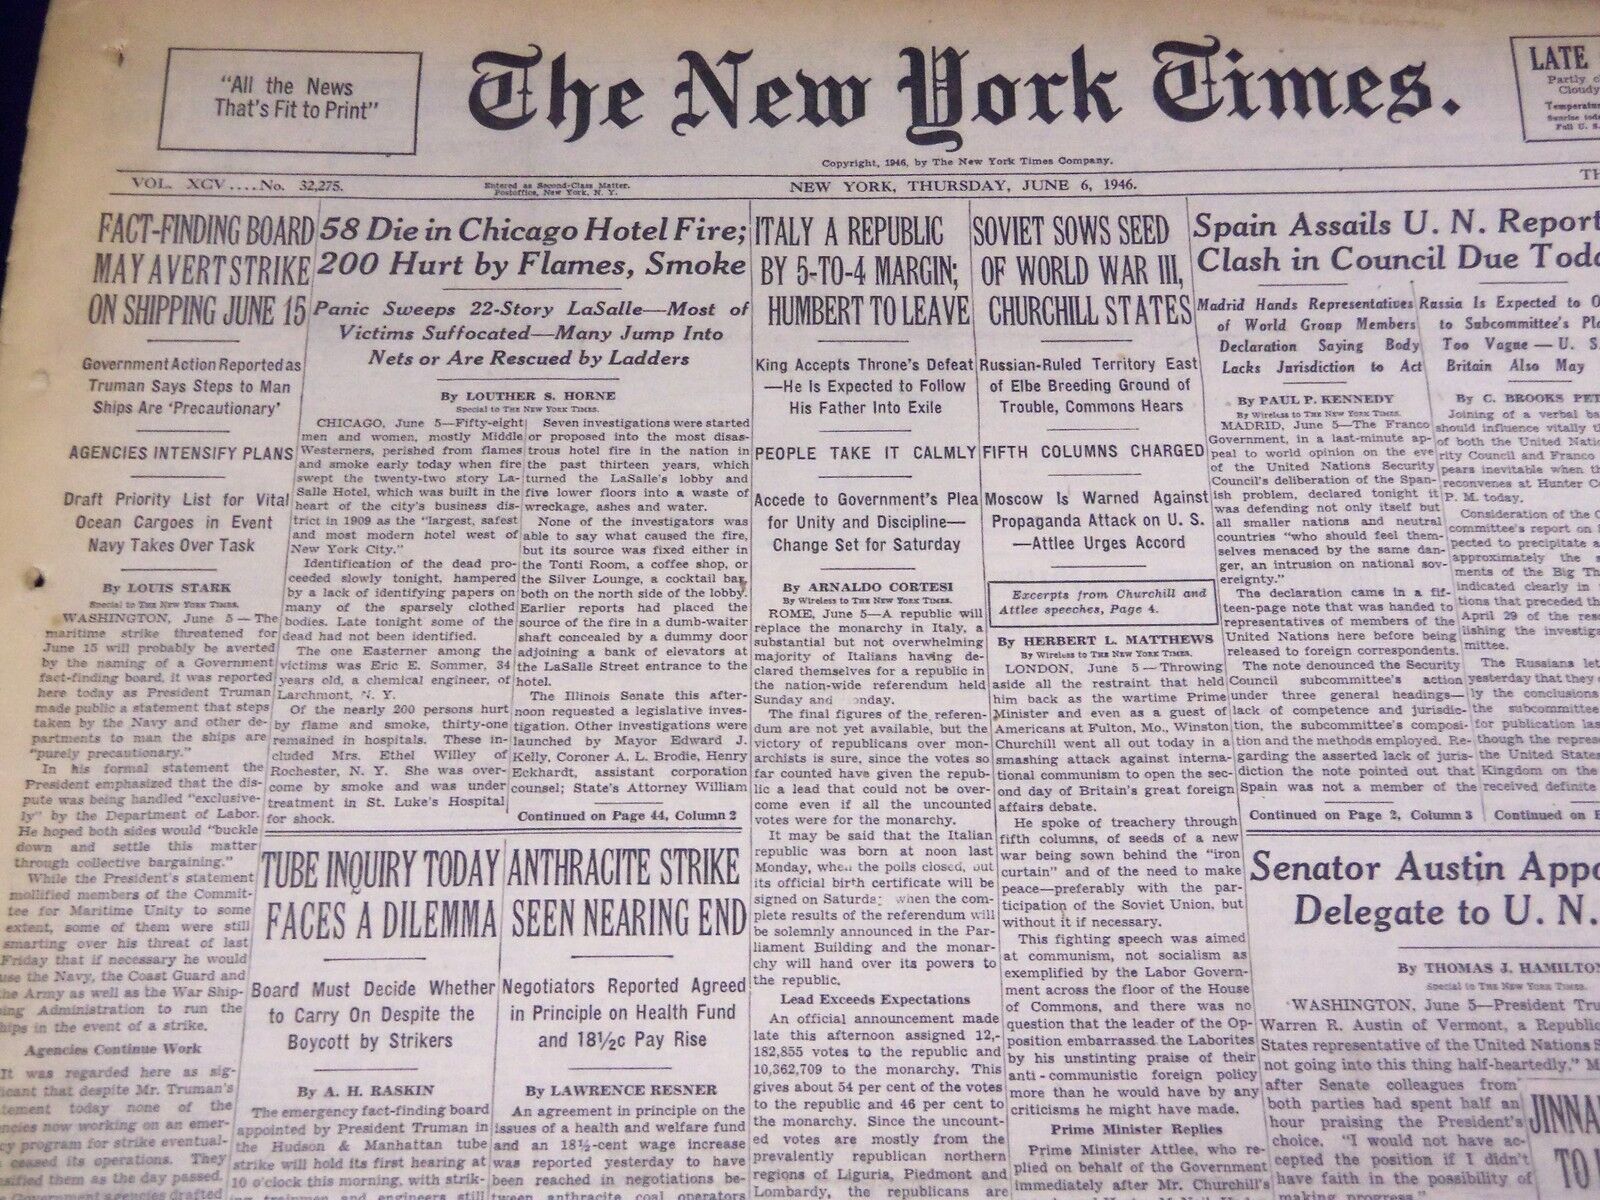 1946 JUNE 6 NEW YORK TIMES - 58 DIE IN CHICAGO HOTEL FIRE - NT 2696